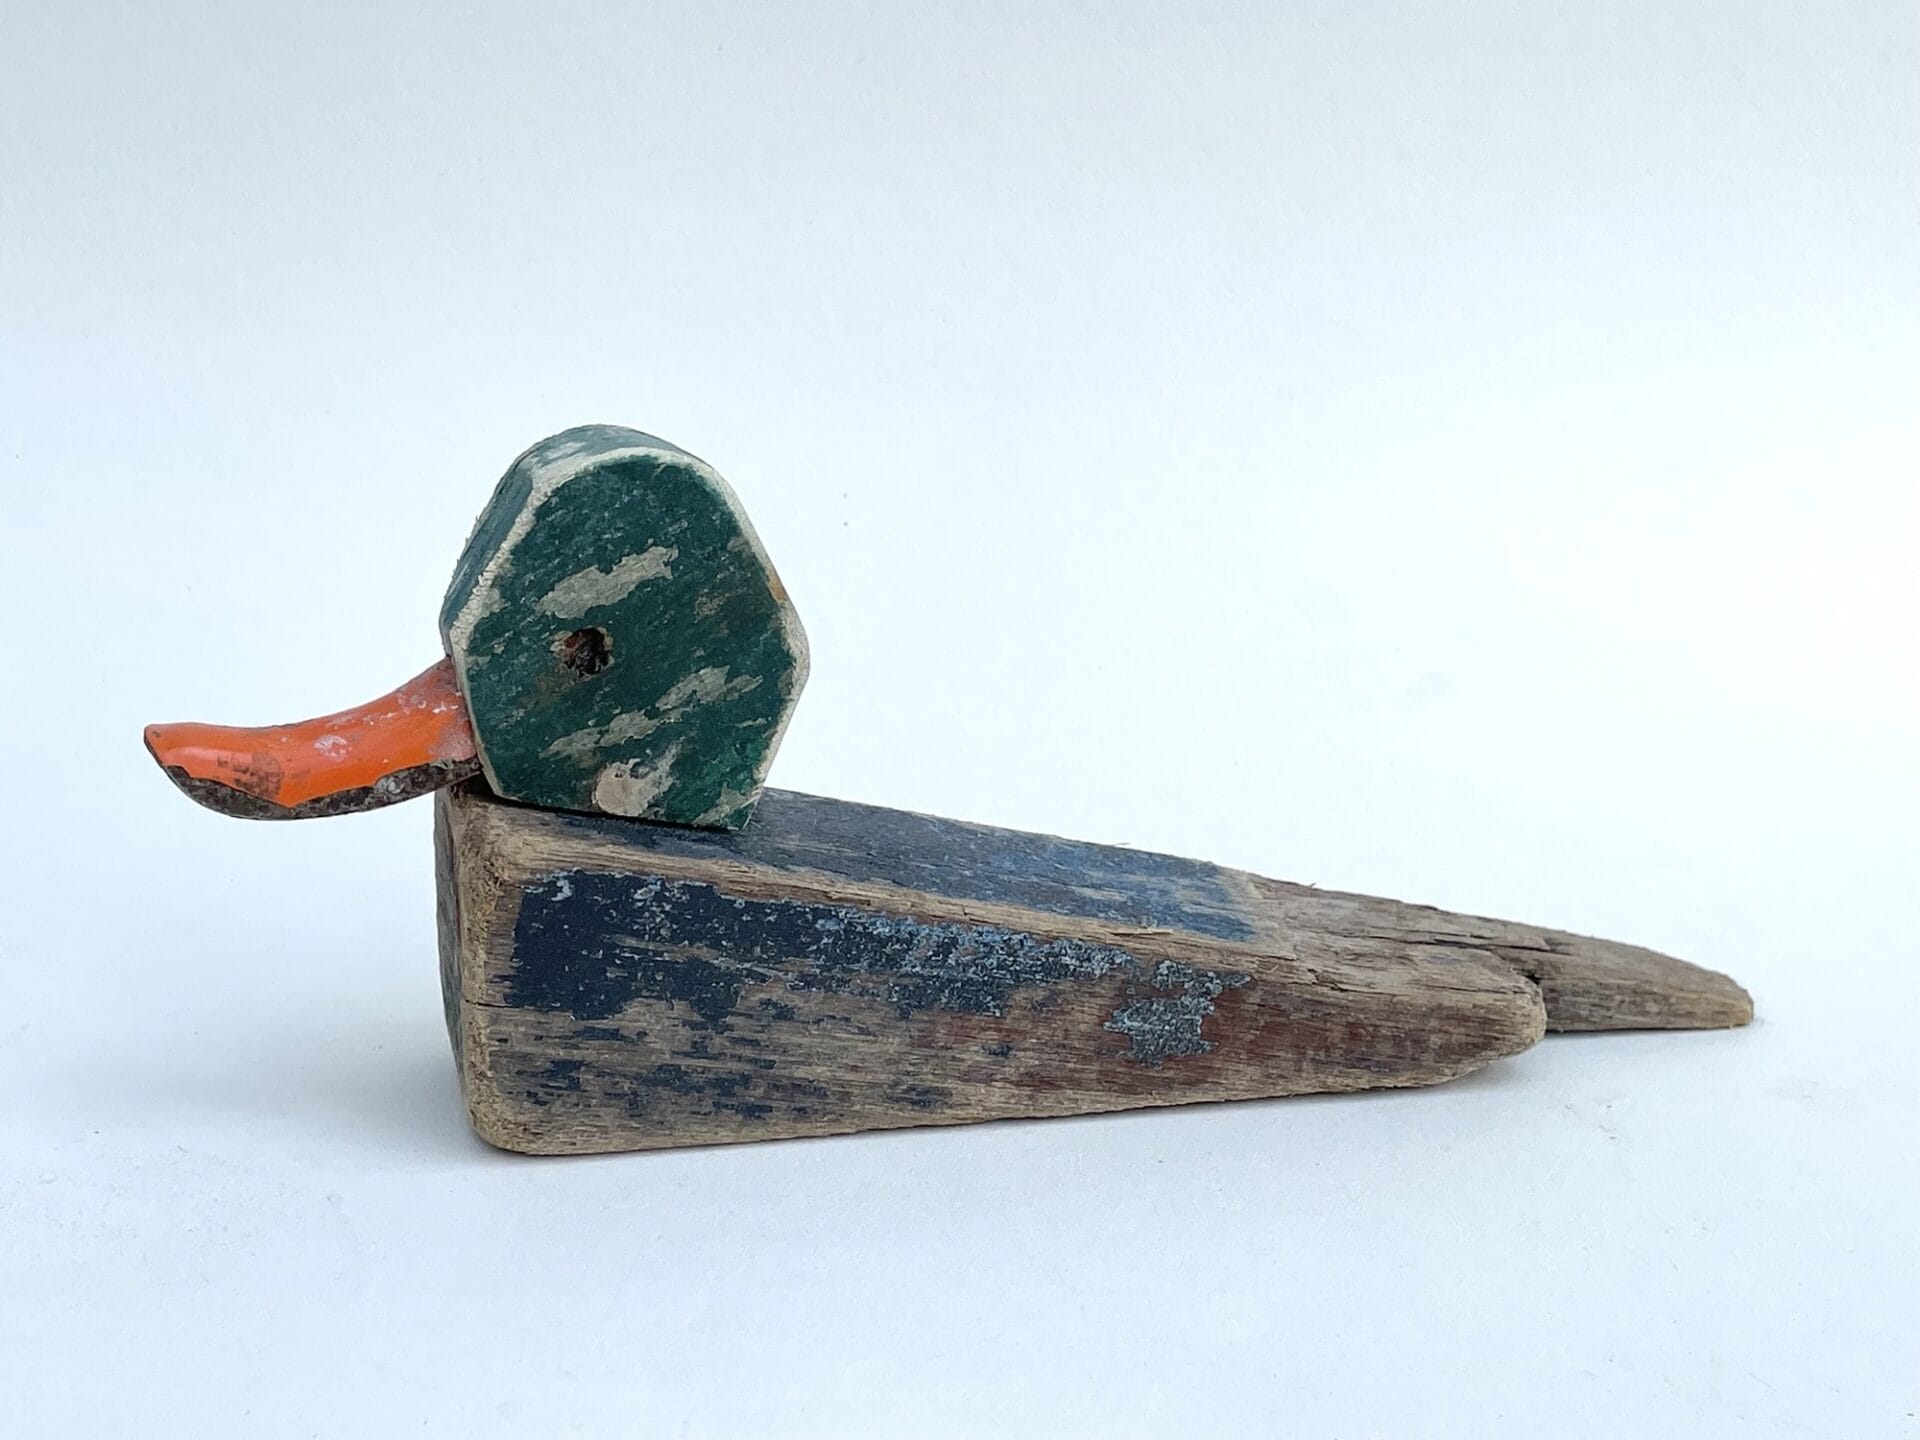 a small wooden sculpture of a mallard duck made from repurposed found materials